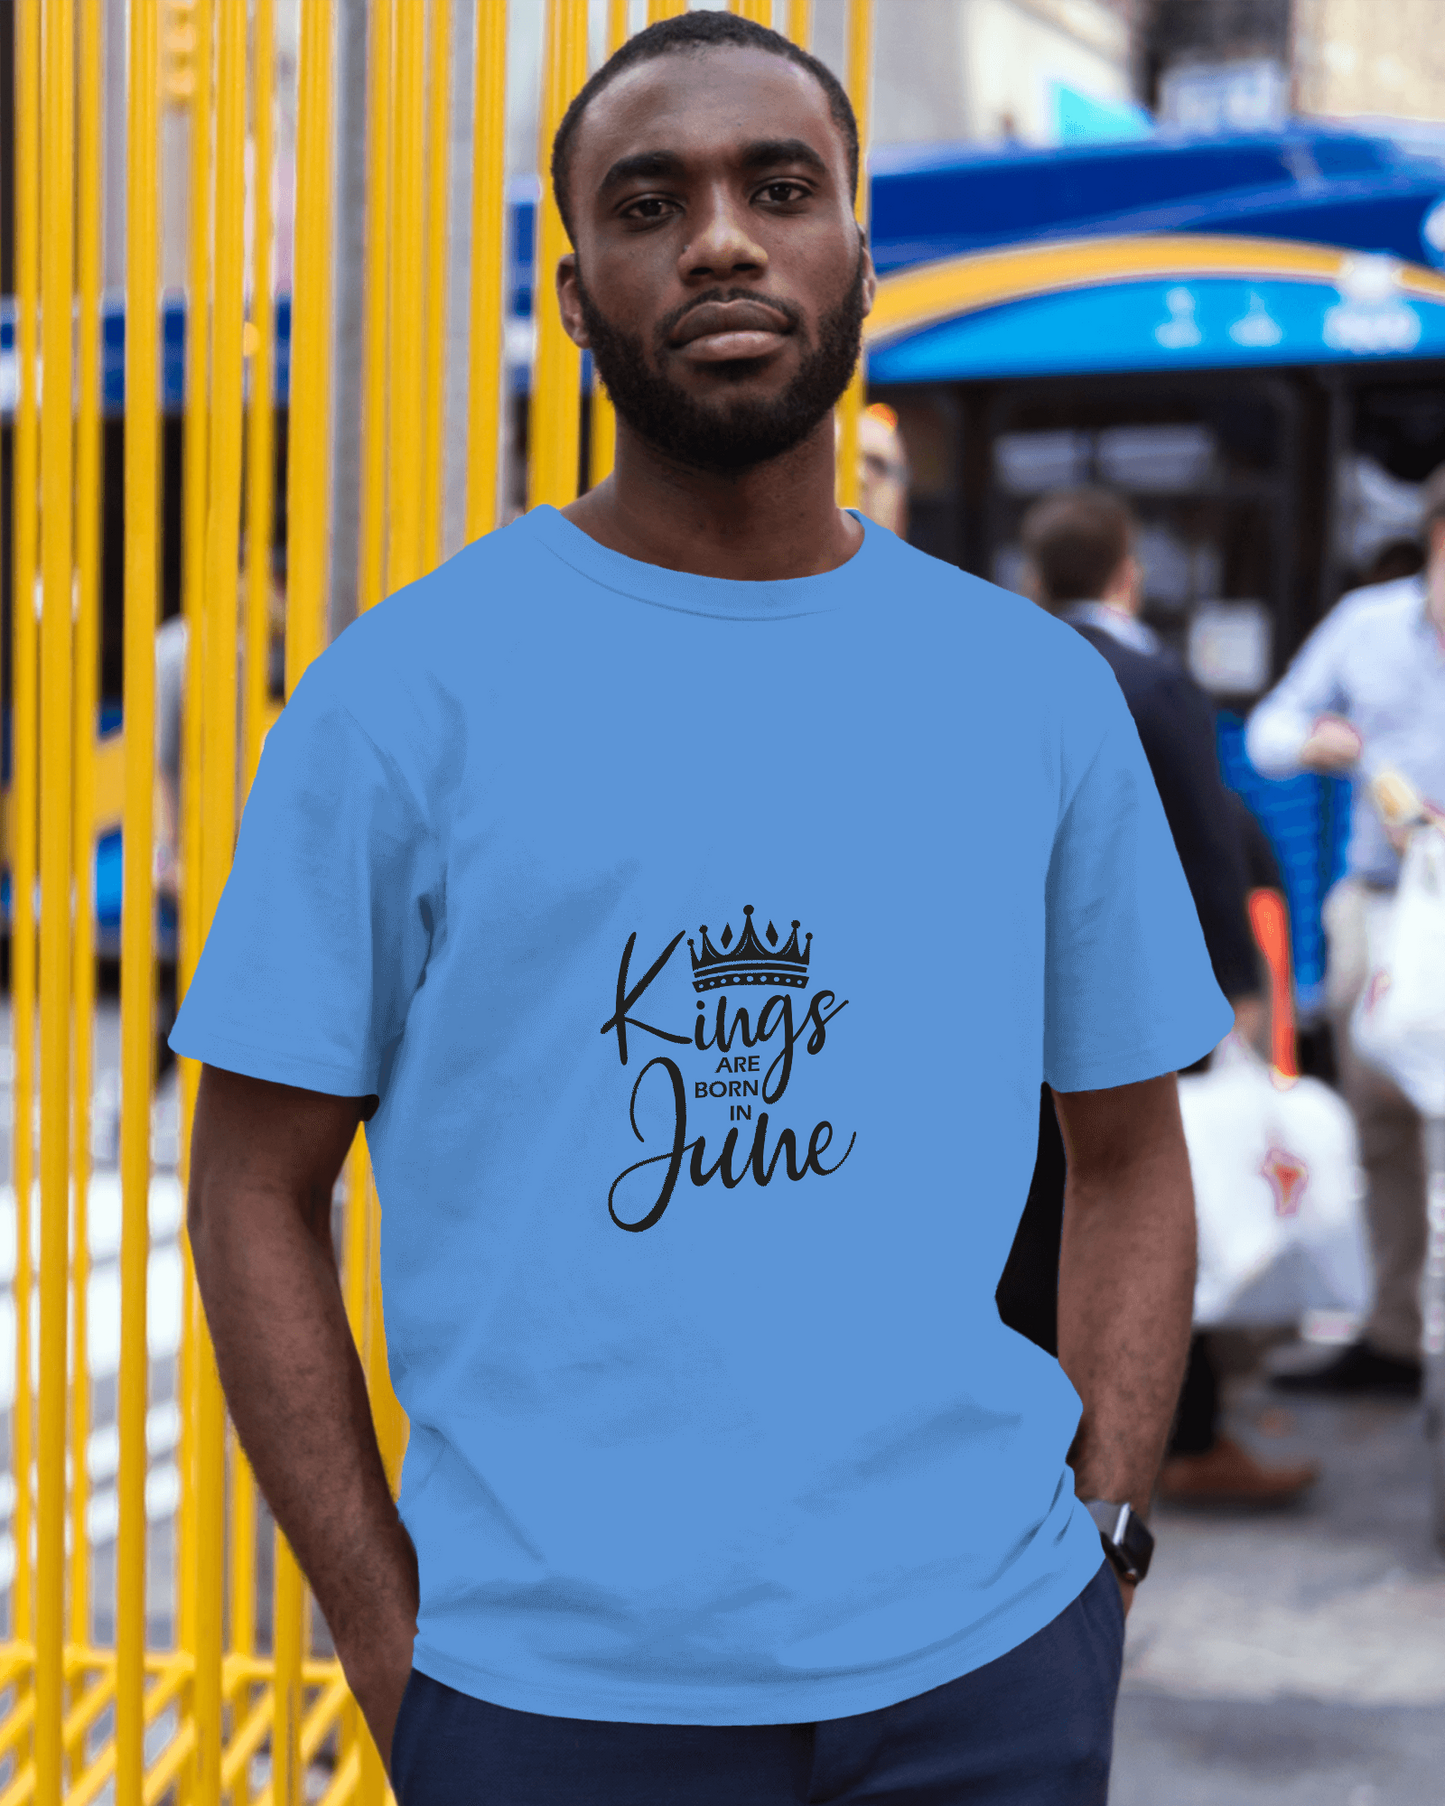 Kings Are Born In June Tee